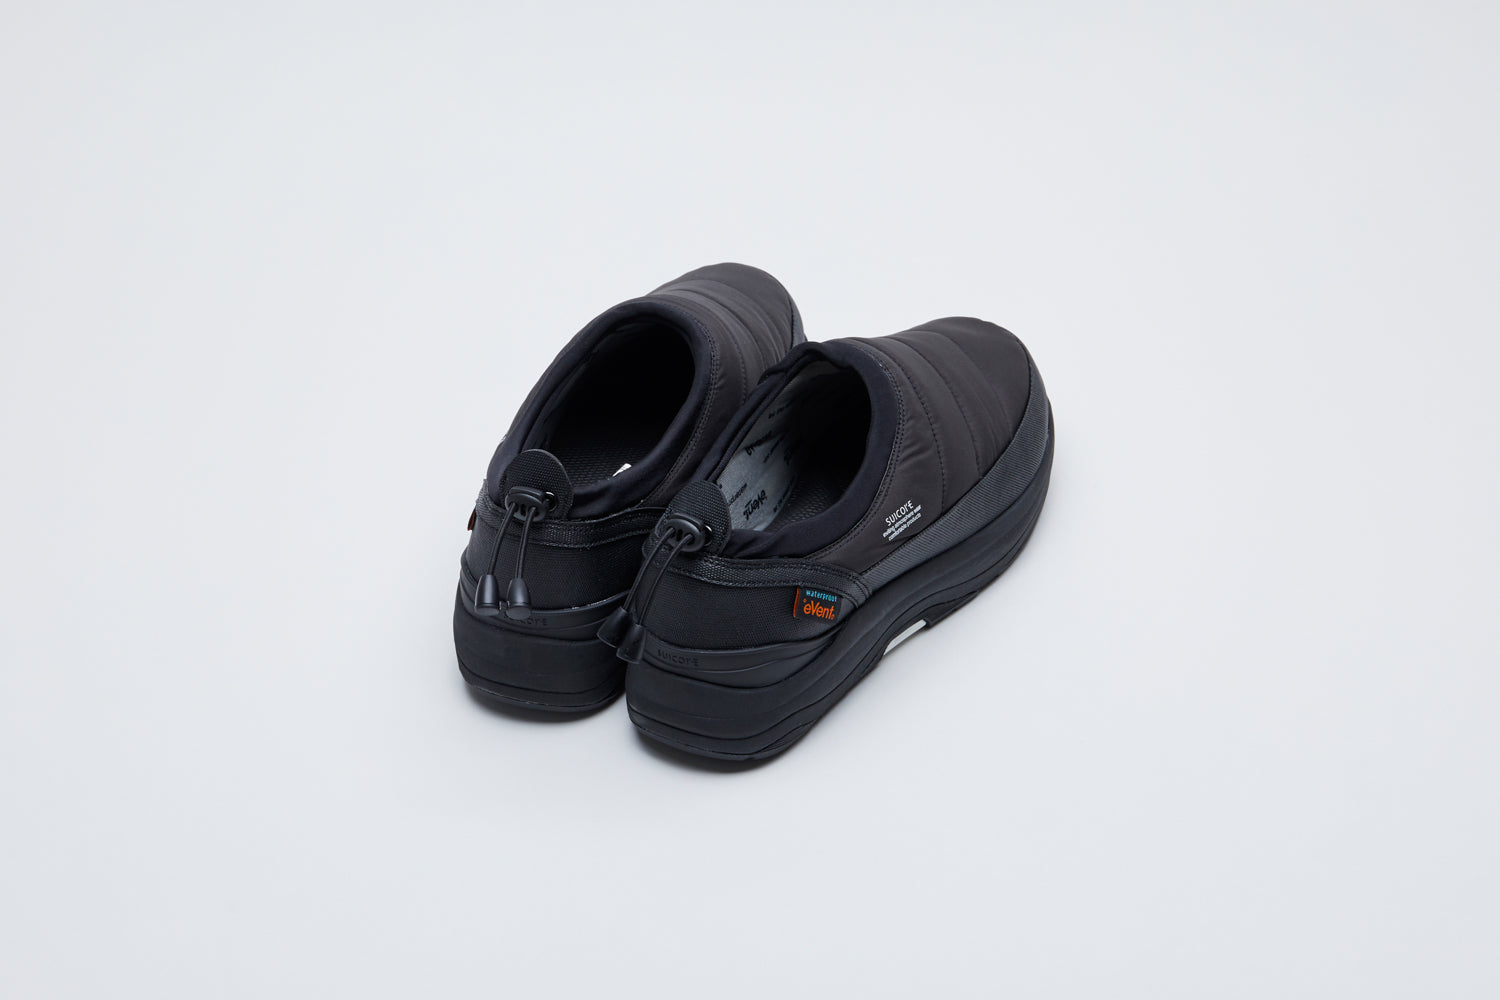 SUICOKE PEPPER-evab low top ankle boots with black nylon upper and running sole with adjustable toggle cord closure. From Fall/Winter 2021 collection on SUICOKE Official US & Canada Webstore.